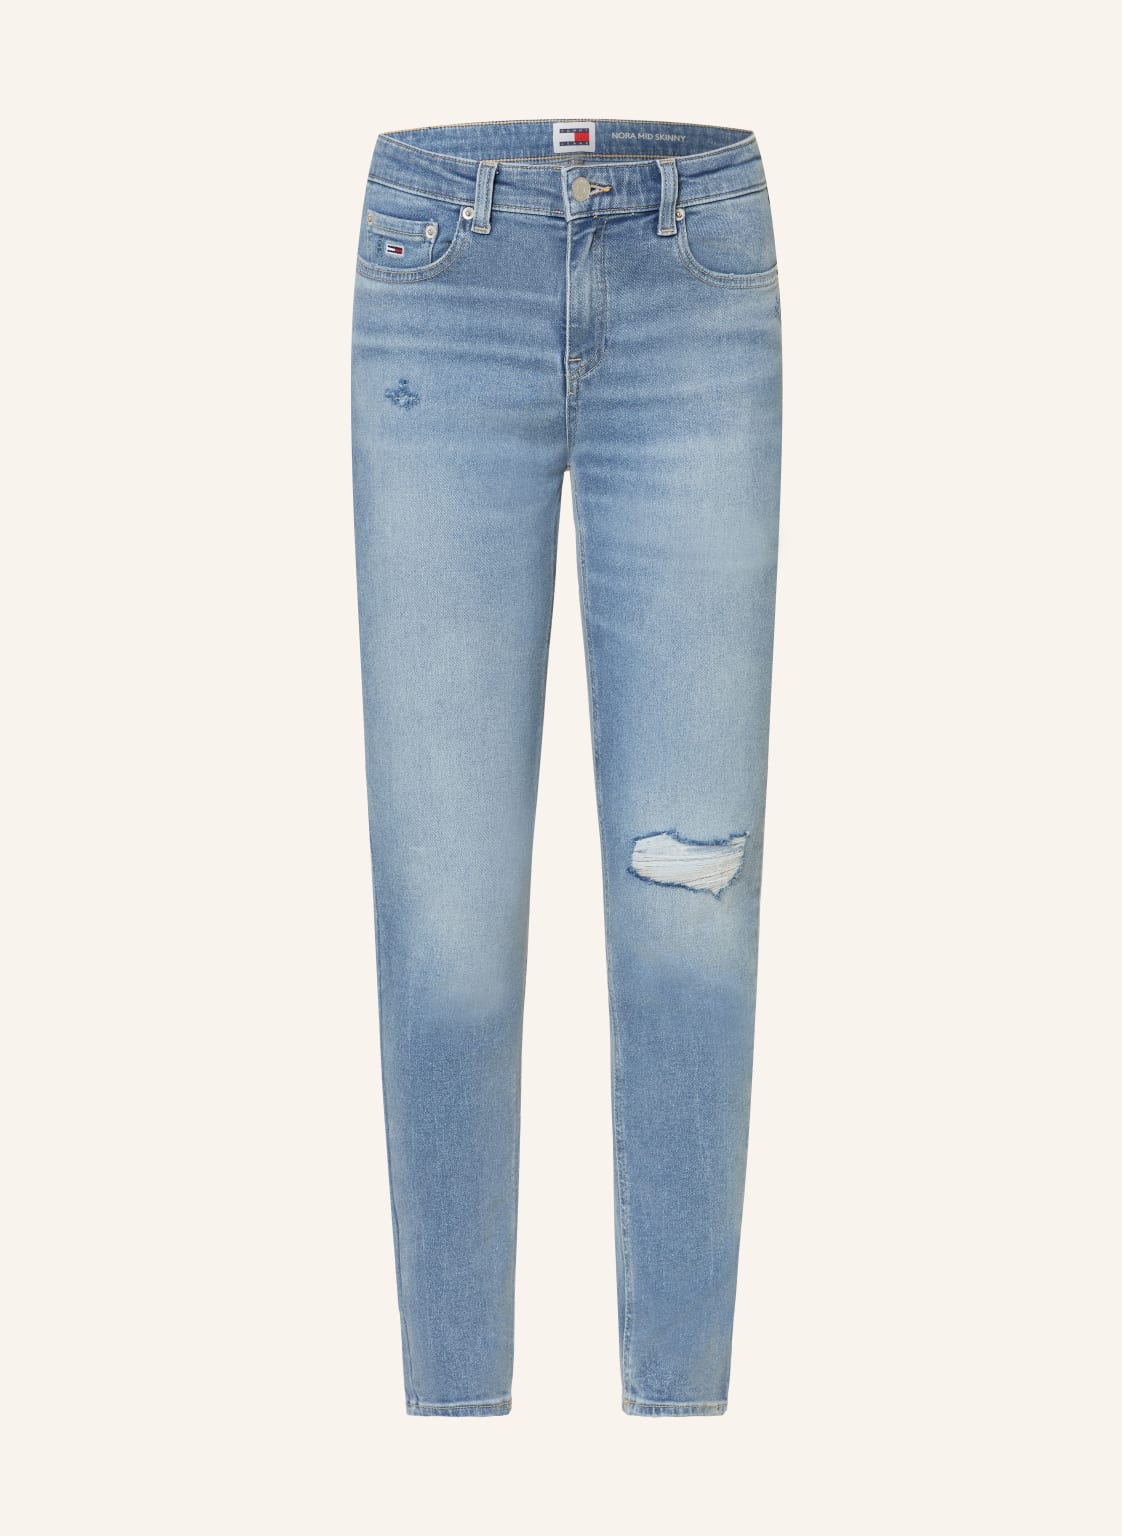 Tommy Jeans Skinny Jeans Nora blau von Tommy Jeans